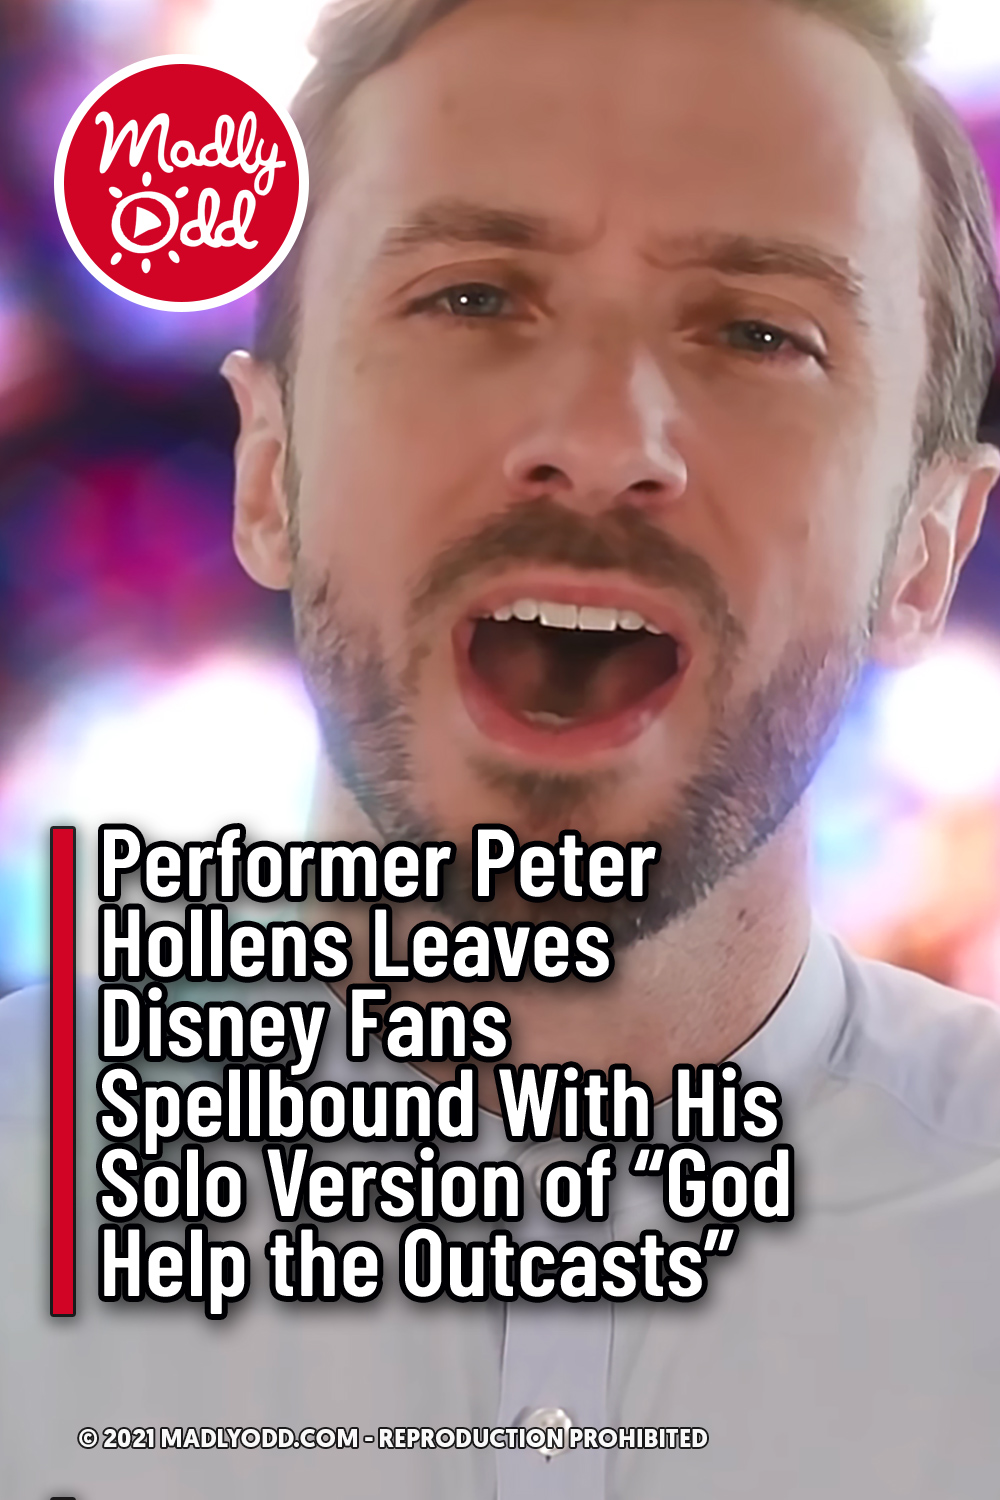 Performer Peter Hollens Leaves Disney Fans Spellbound With His Solo Version of “God Help the Outcasts”